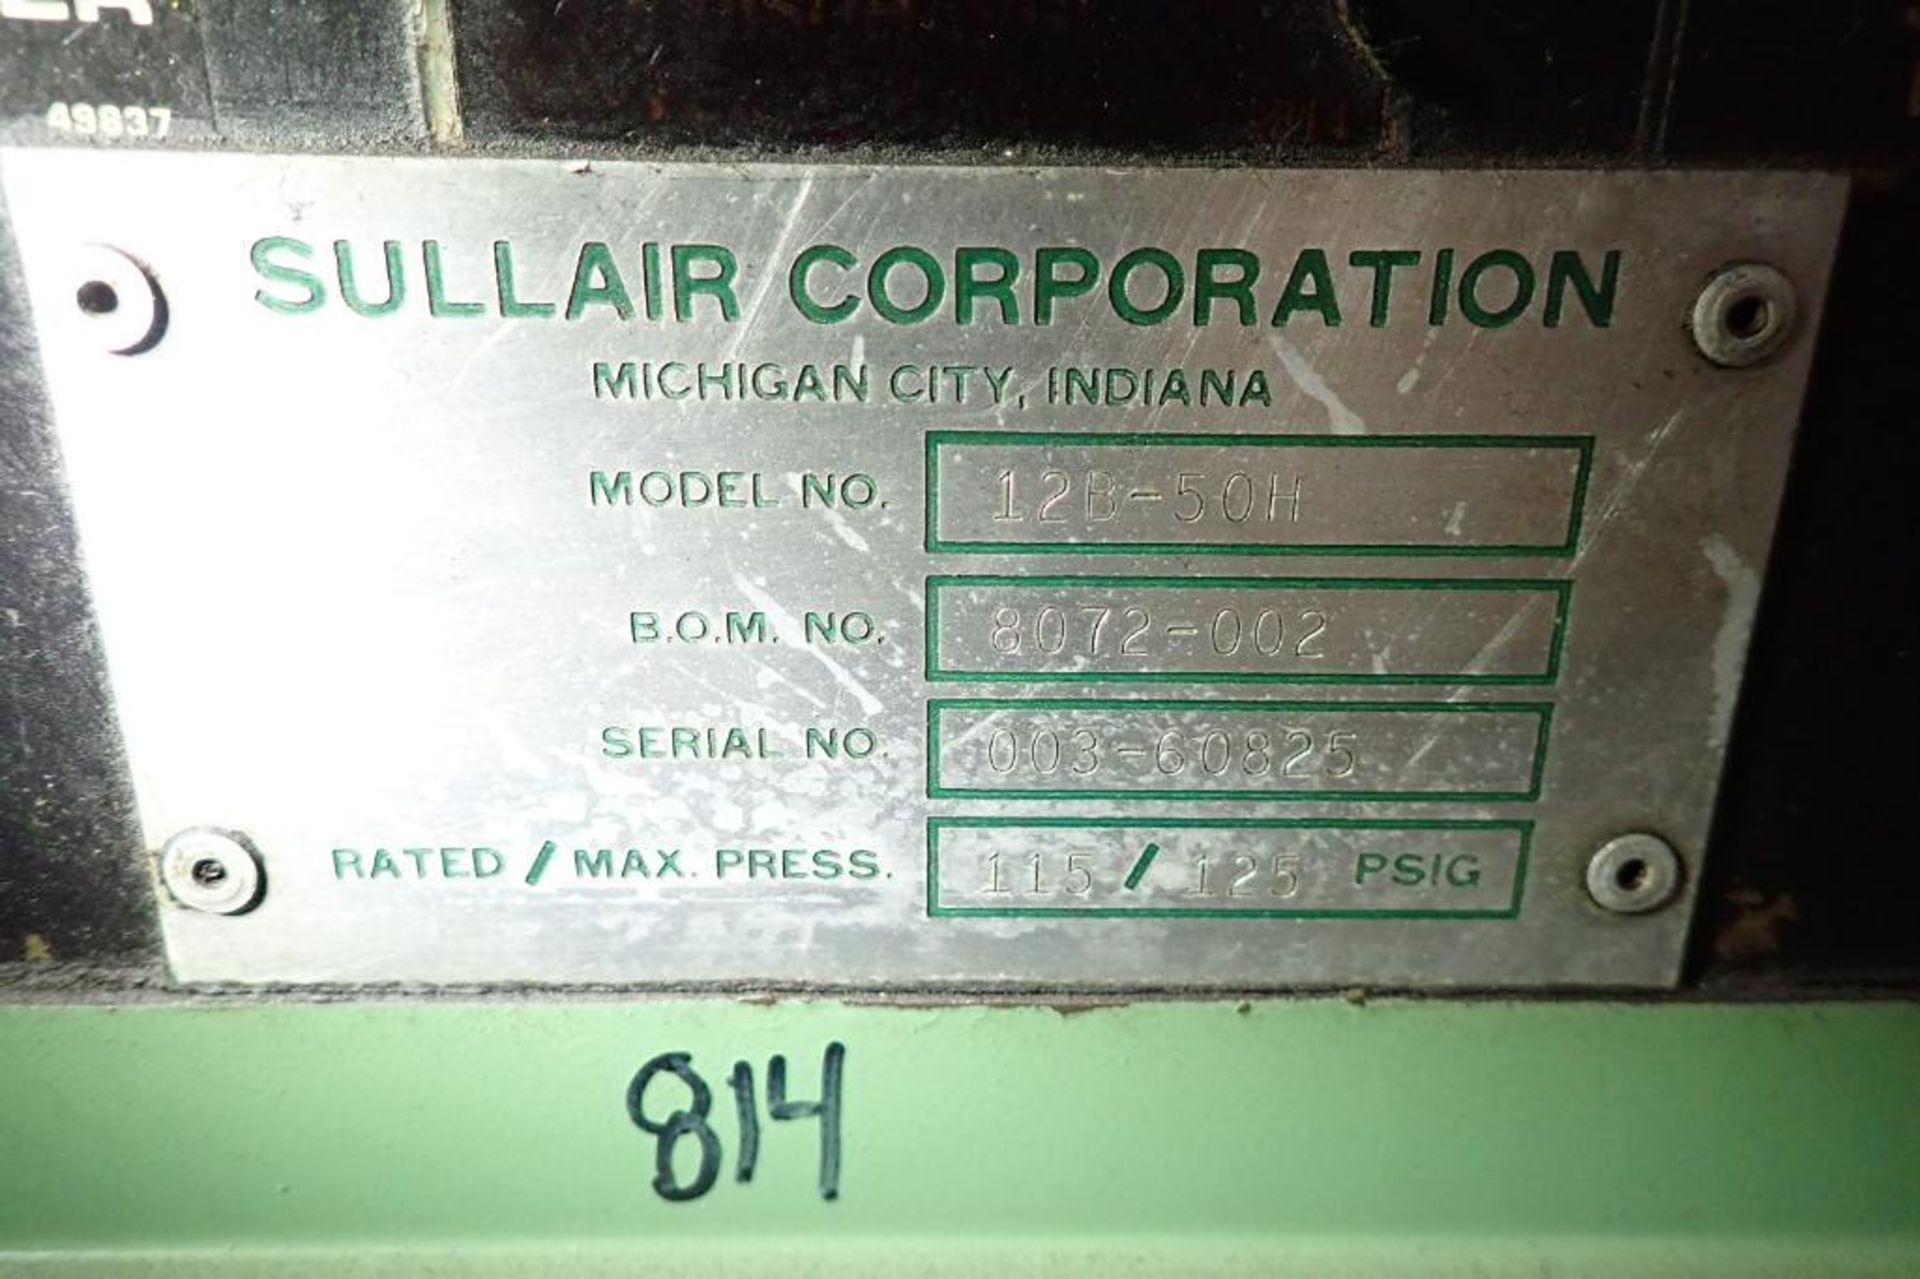 Sullair rotary screw air compressor, Model 12B-50H, SN 003-60825, 41,000 hours, rated max press. 115 - Image 4 of 8